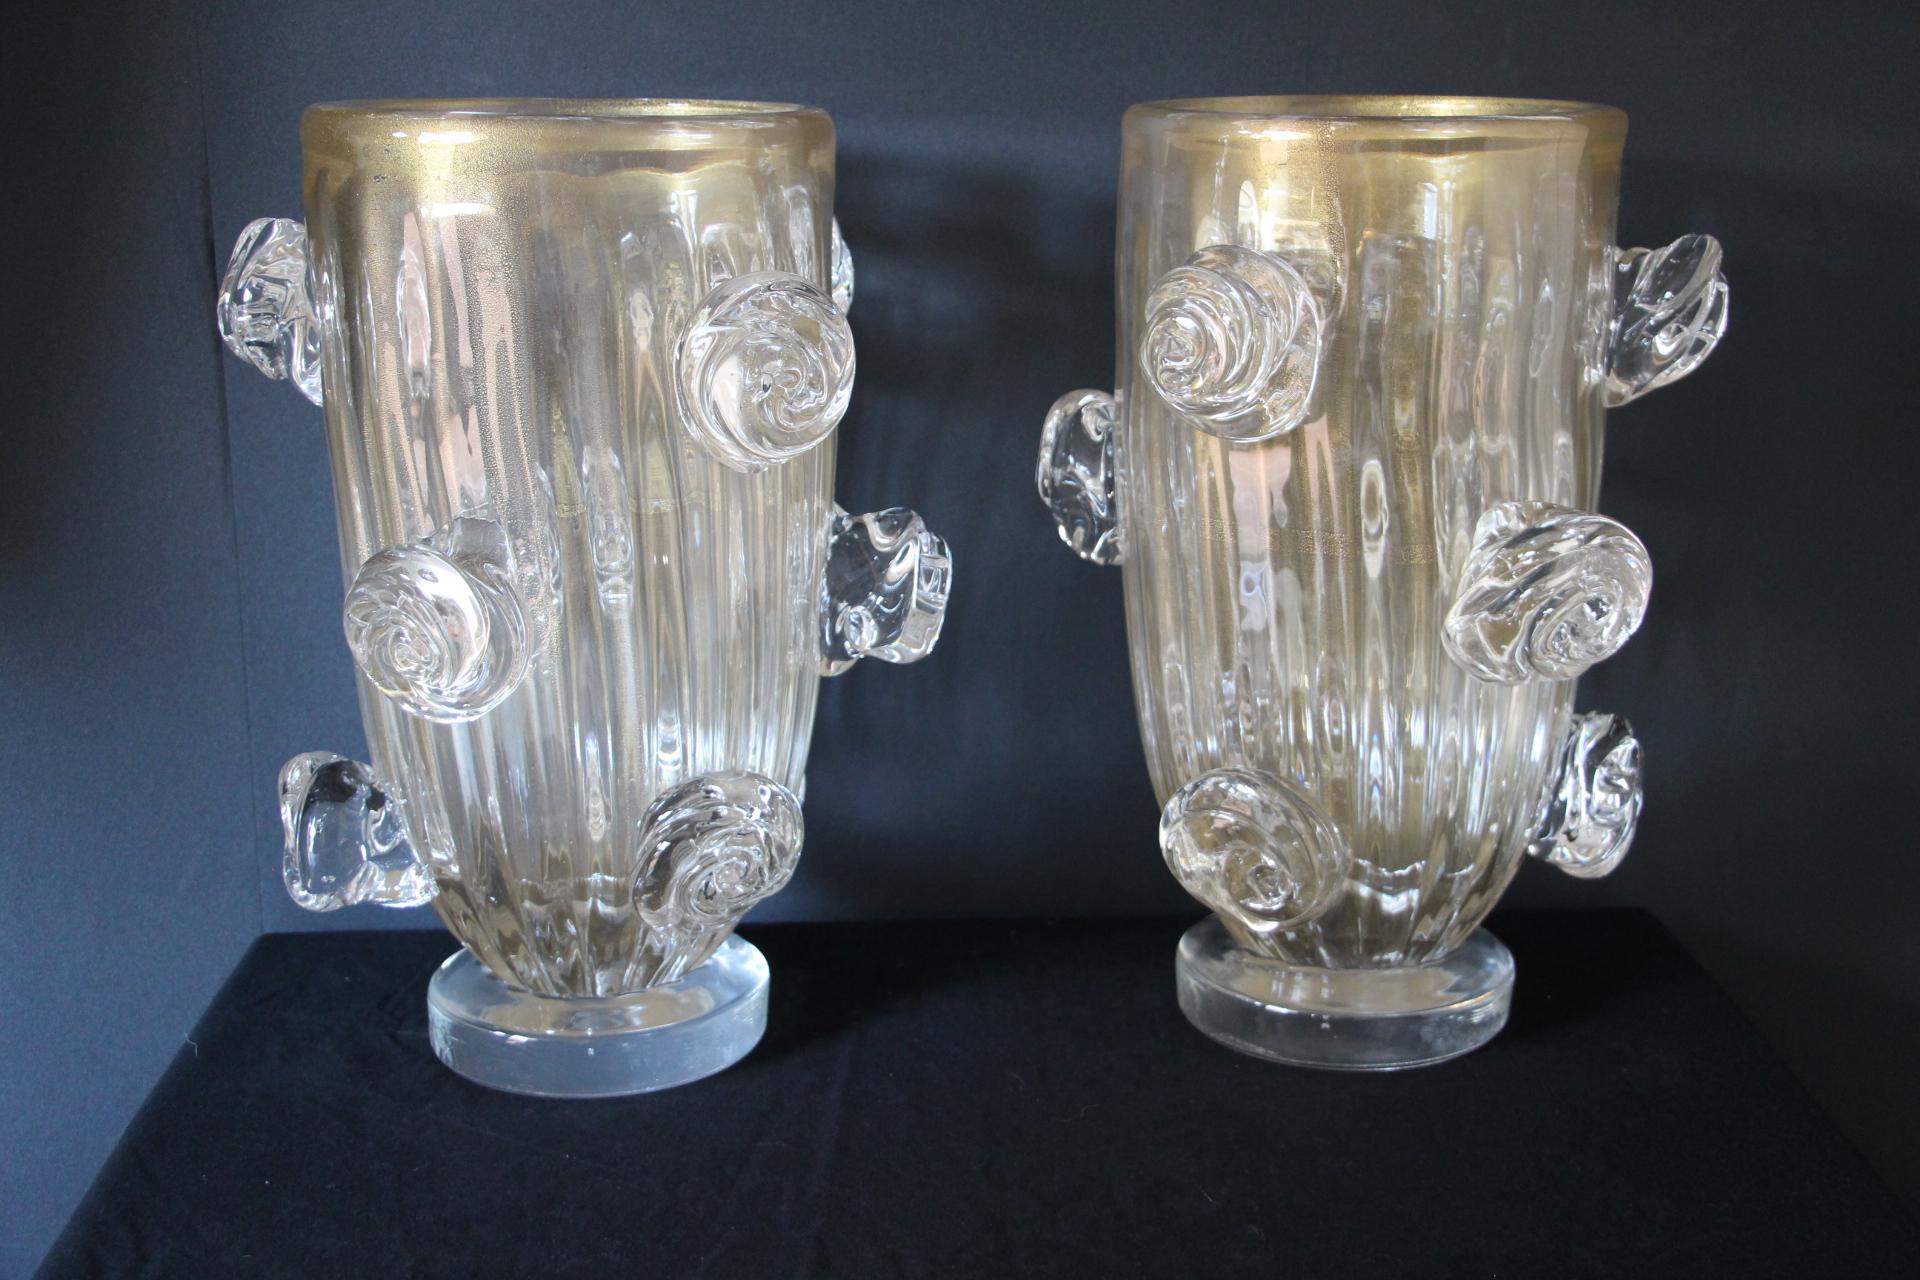 This spectacular pair of vases has got a very unusual golden color that goes from deep beige to light gold according to surrounding colors and light. This special effect is due to gold dust inclusions in glass.
Moreover they were entirely made by